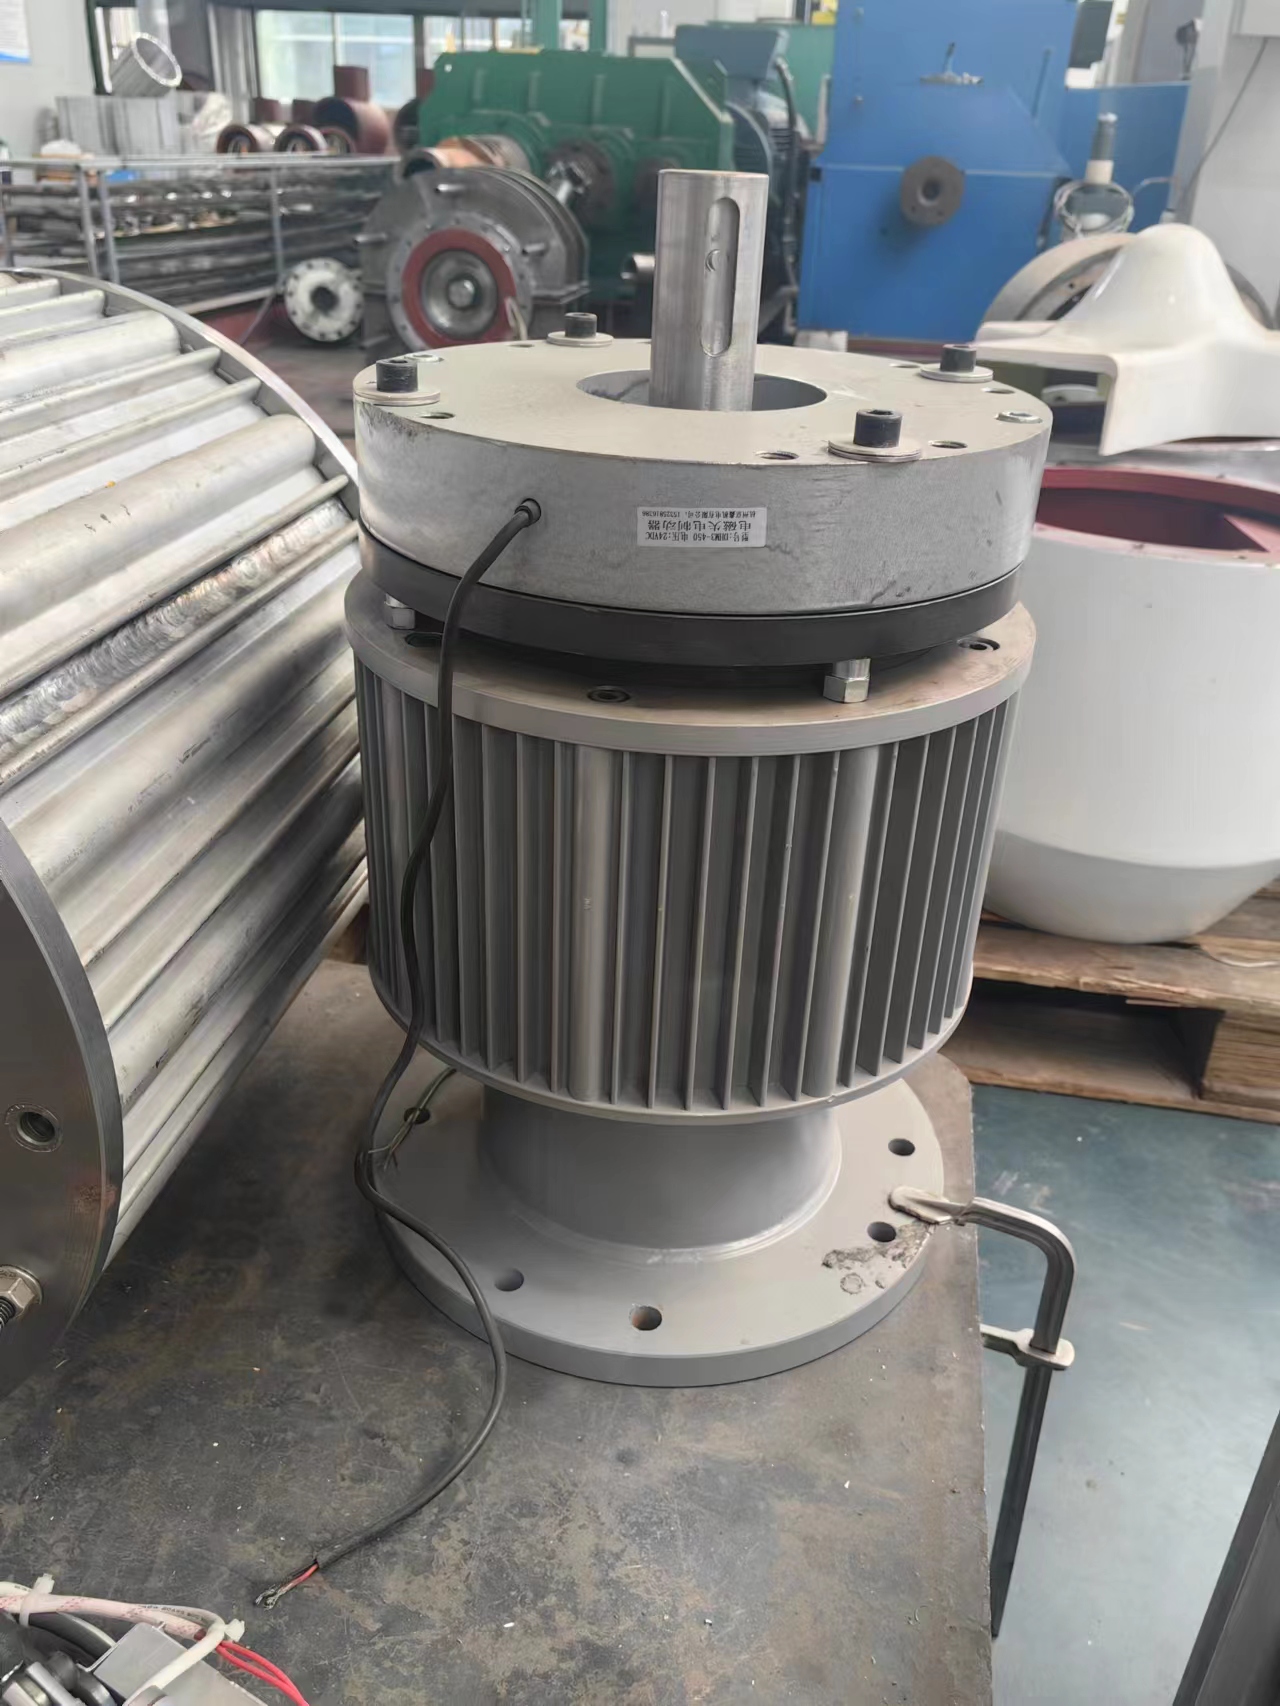 10kW 750rpm high-speed motor three-phase AC synchronous direct drive scientific research test Hydraulic wind permanent magnet generator